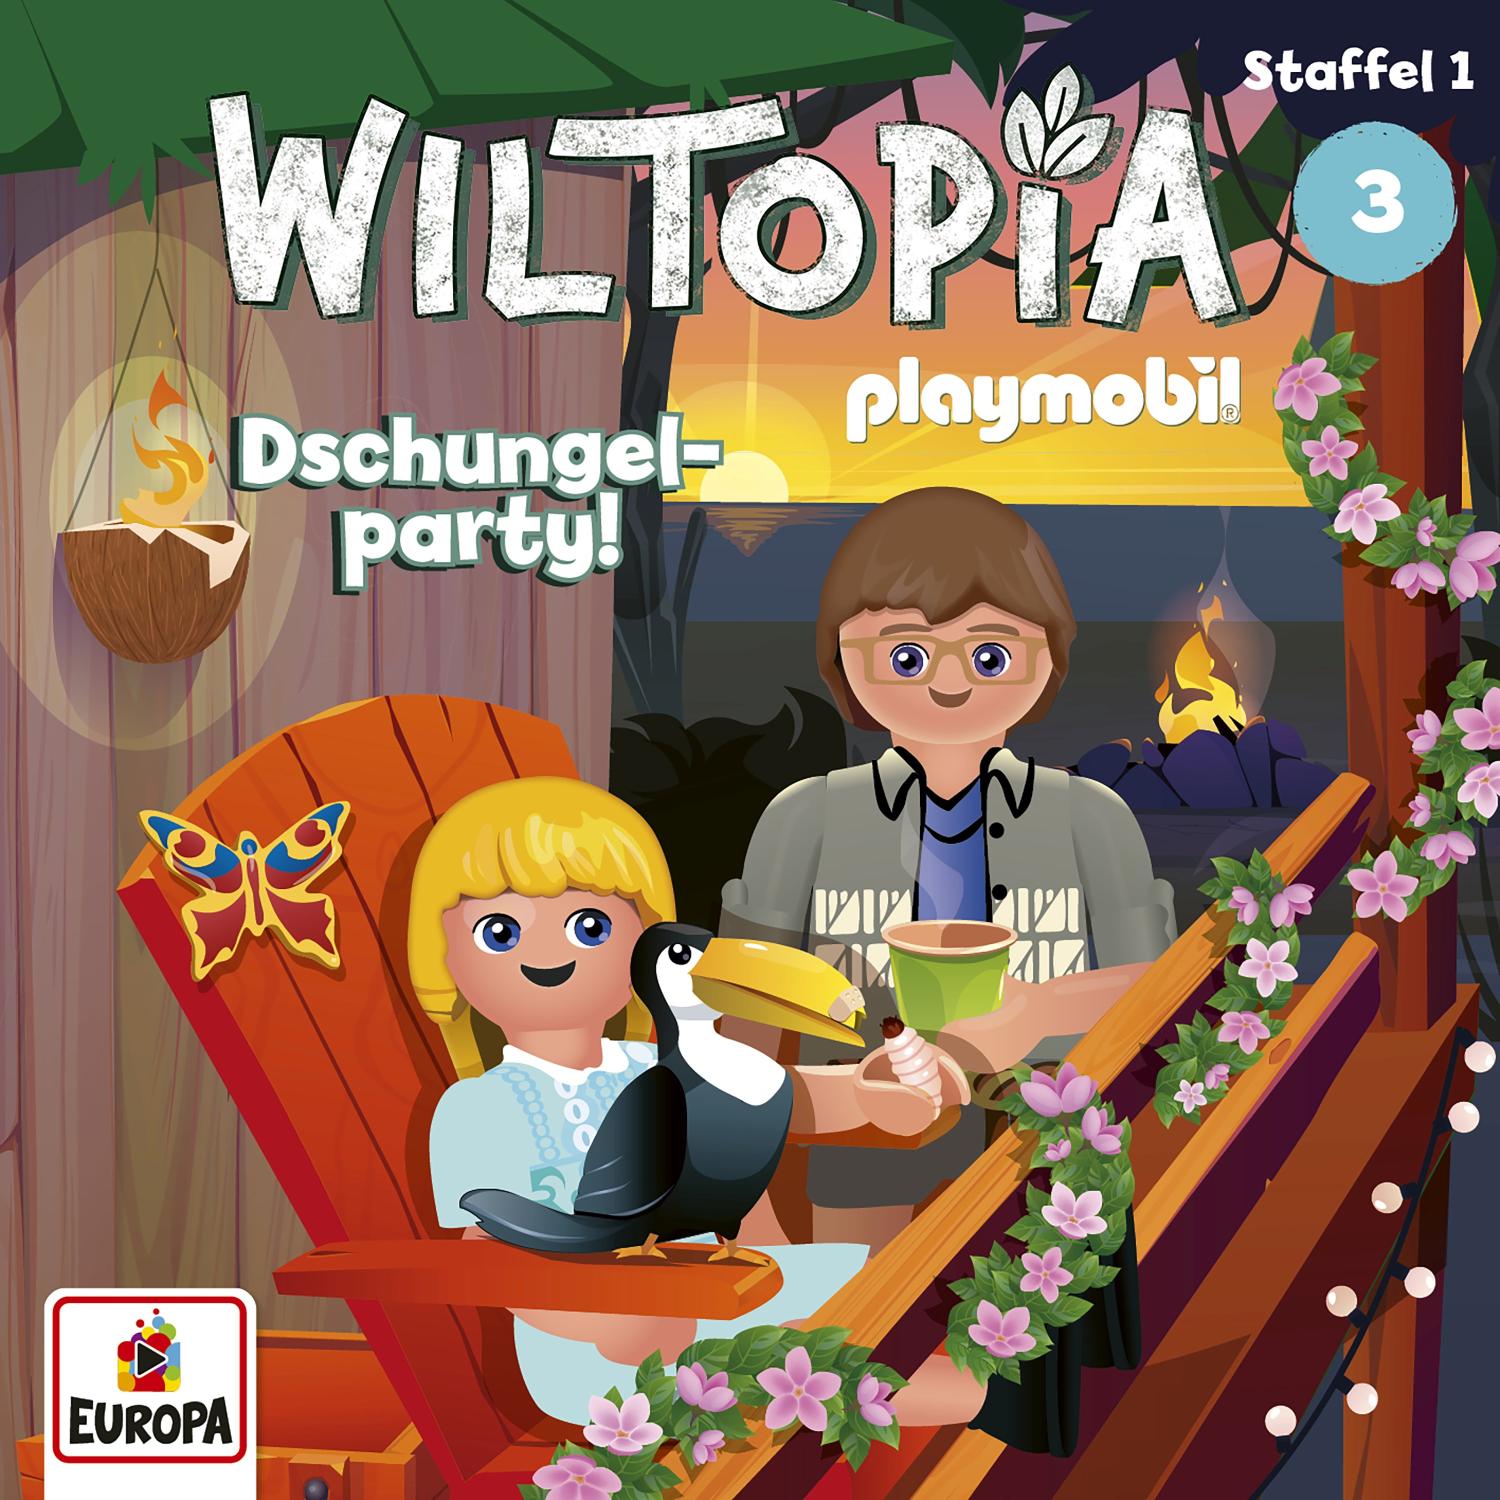 Wiltopia: Dschungelparty!